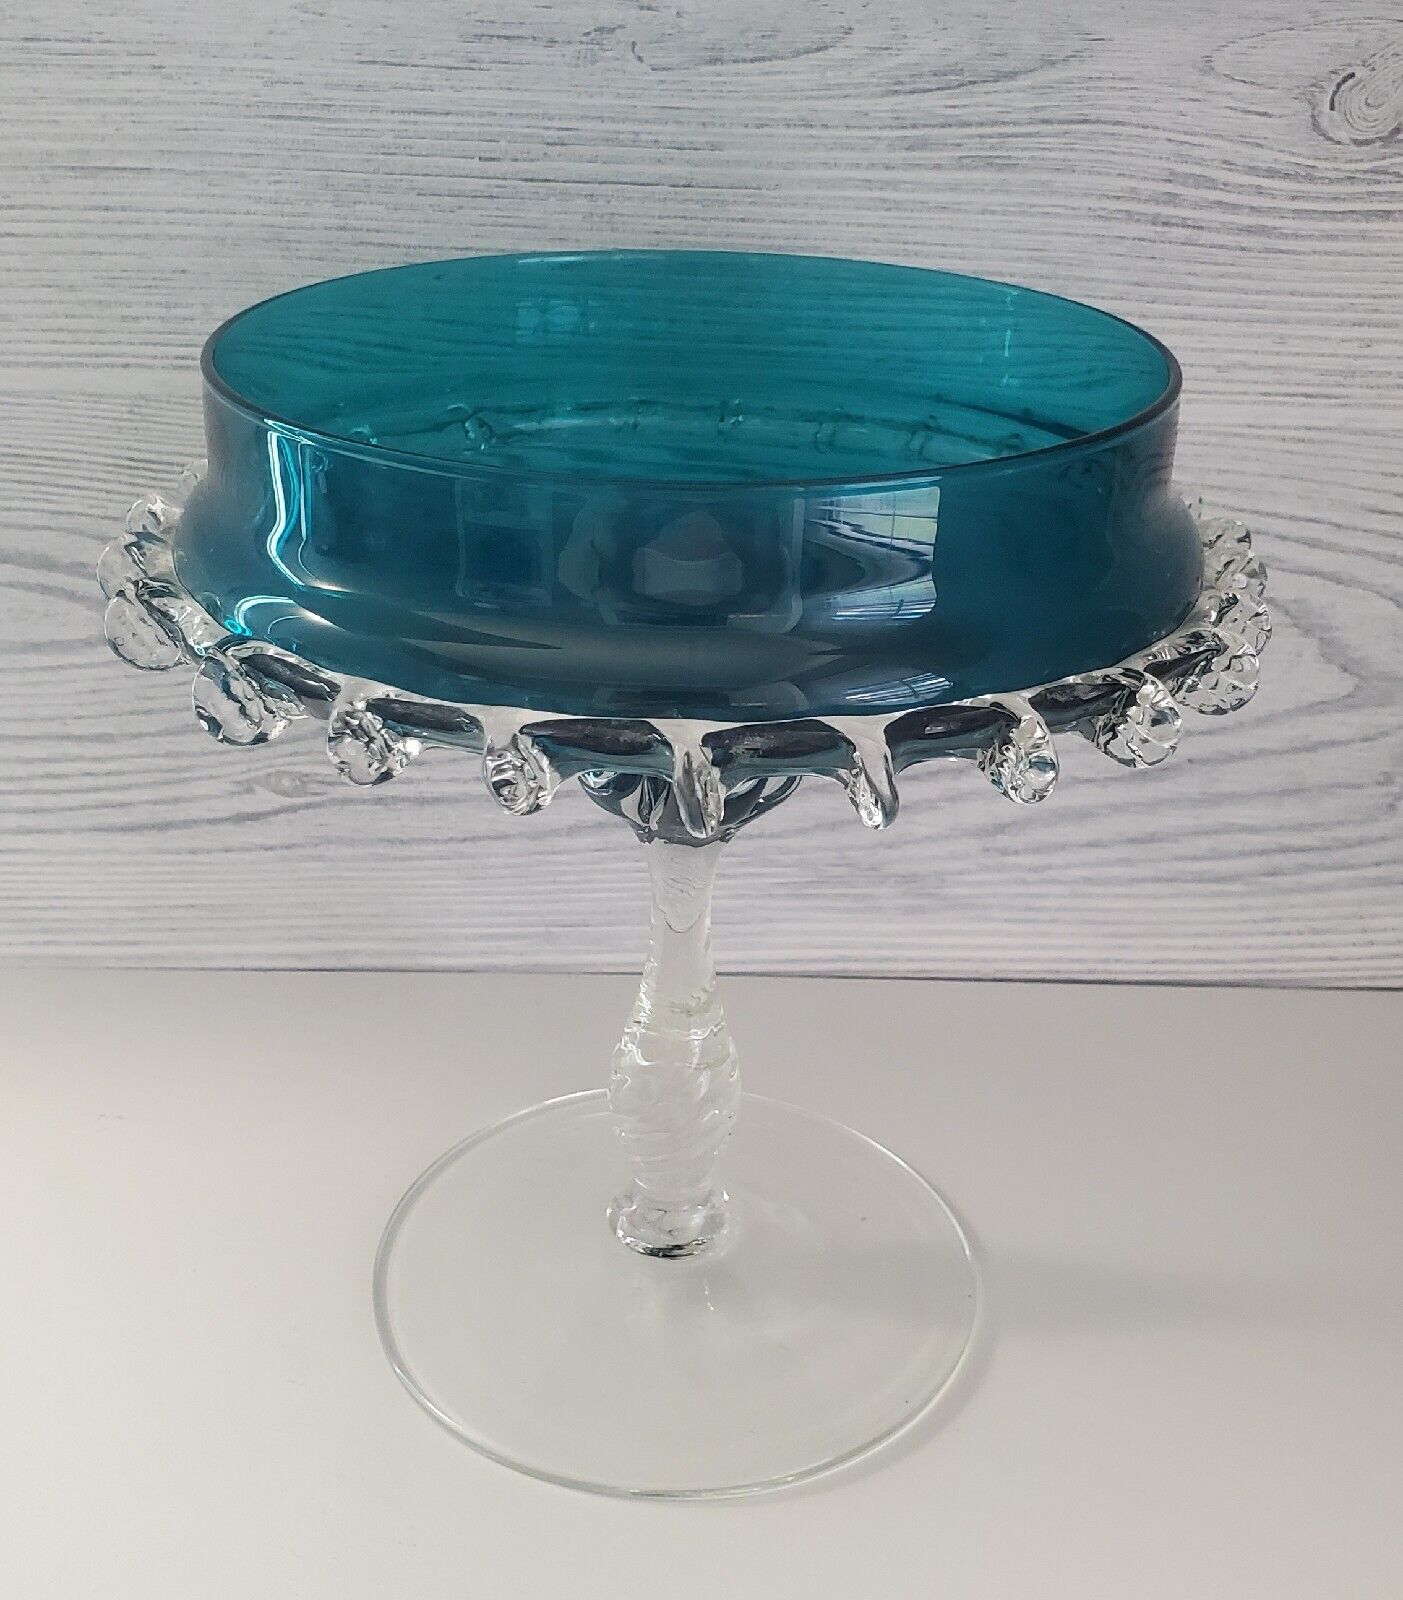 Vintage Murano Glass Compote Teal Blue